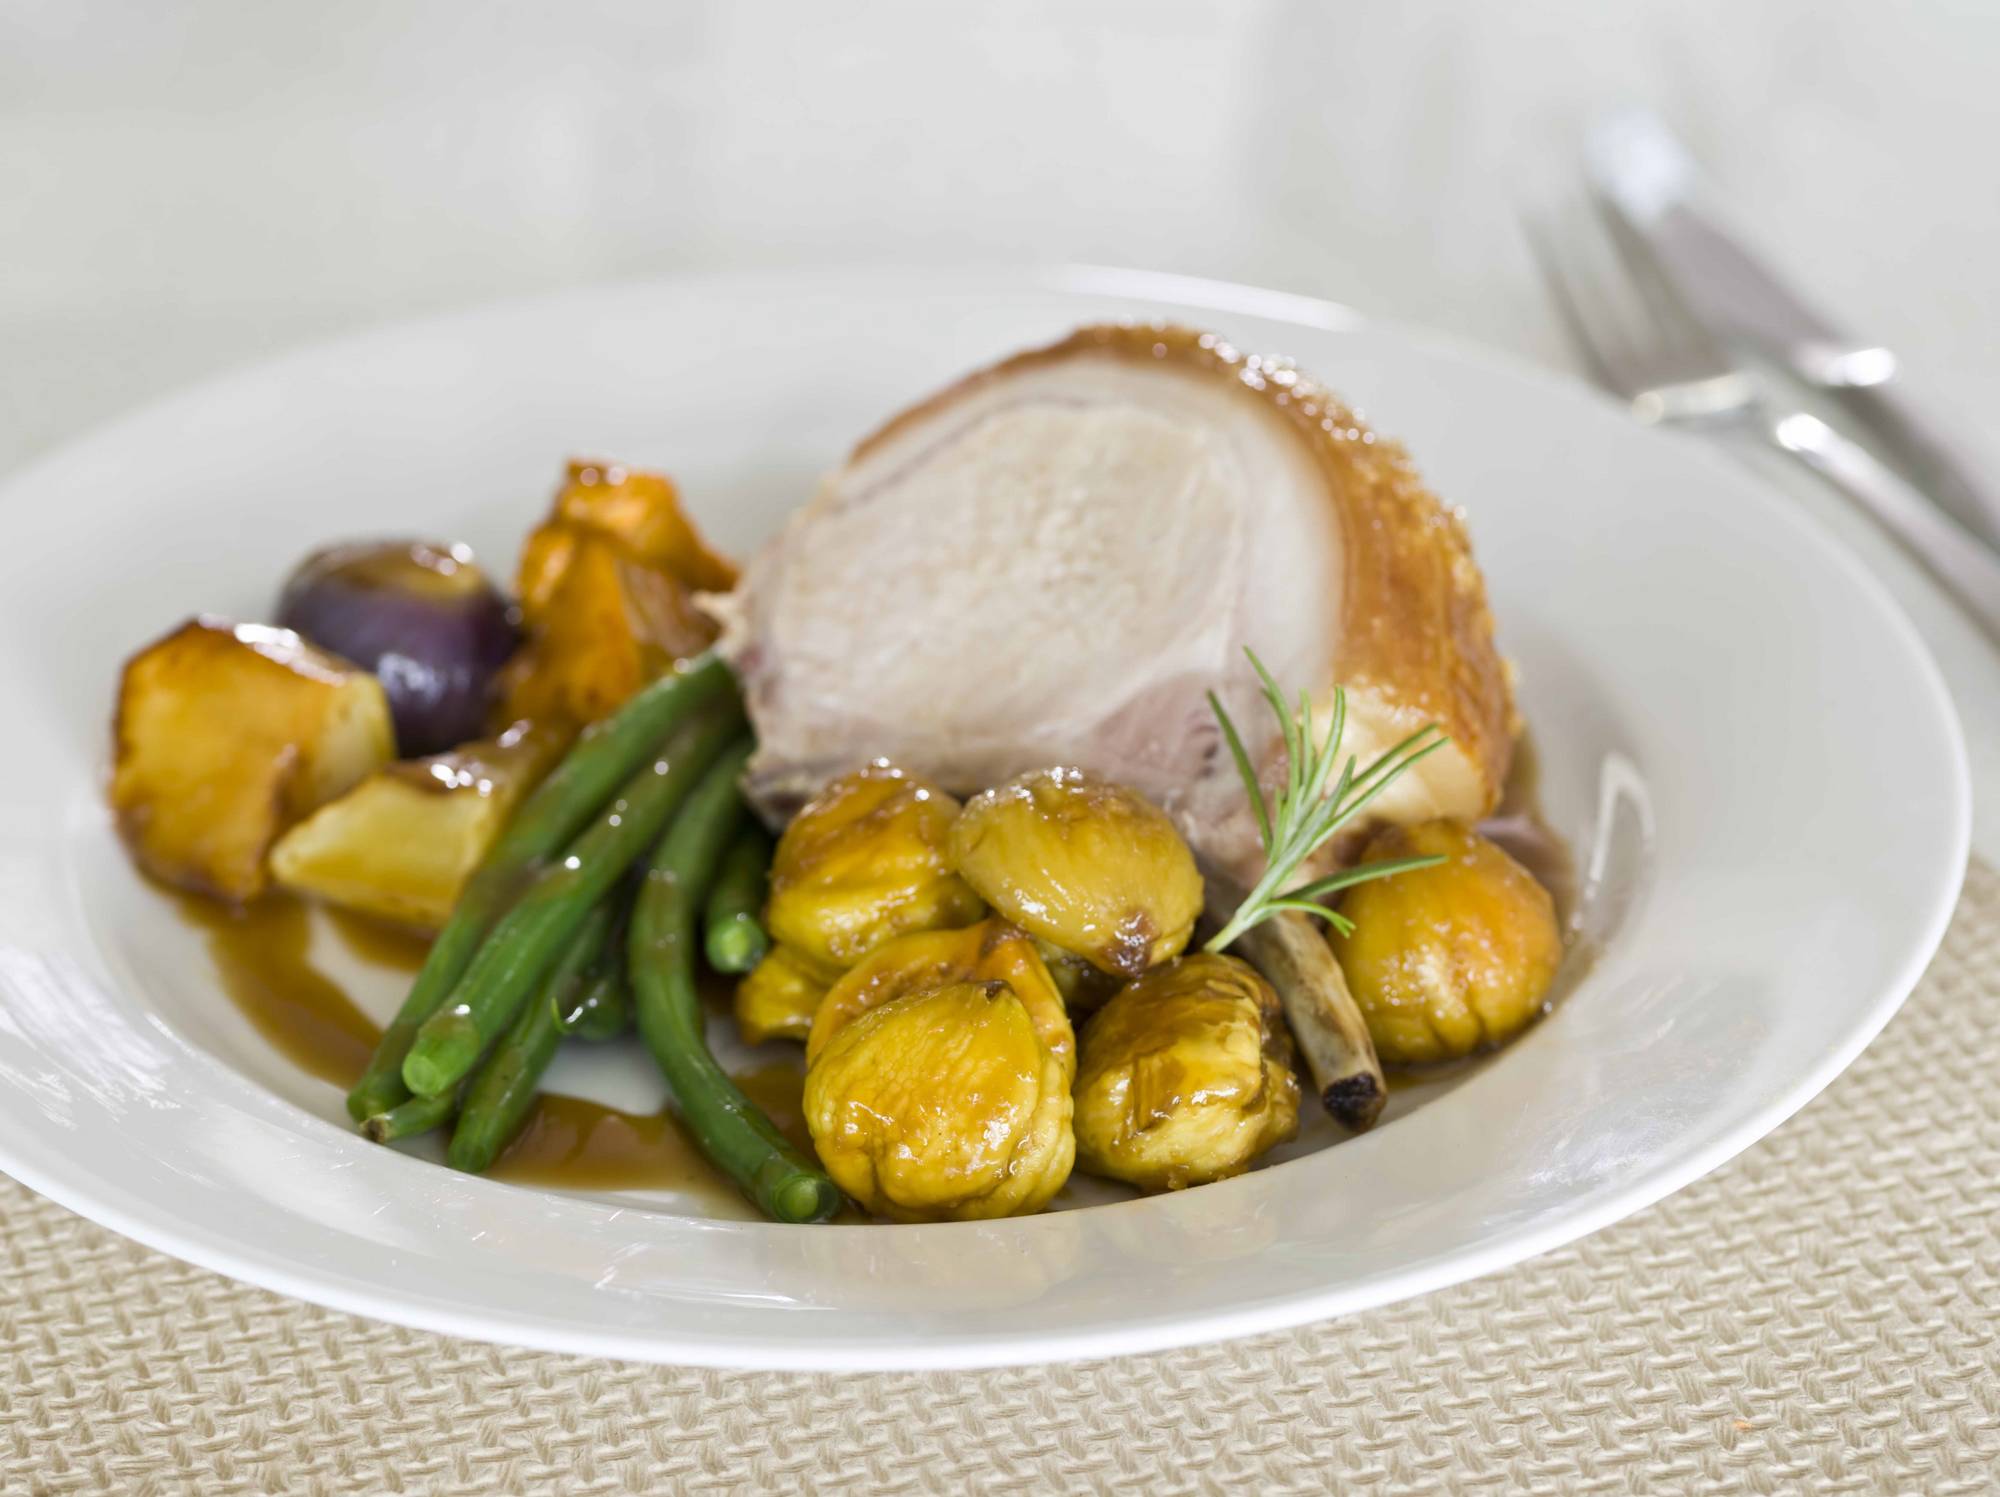 Roasted Pork Loin with Chestnuts and Veg